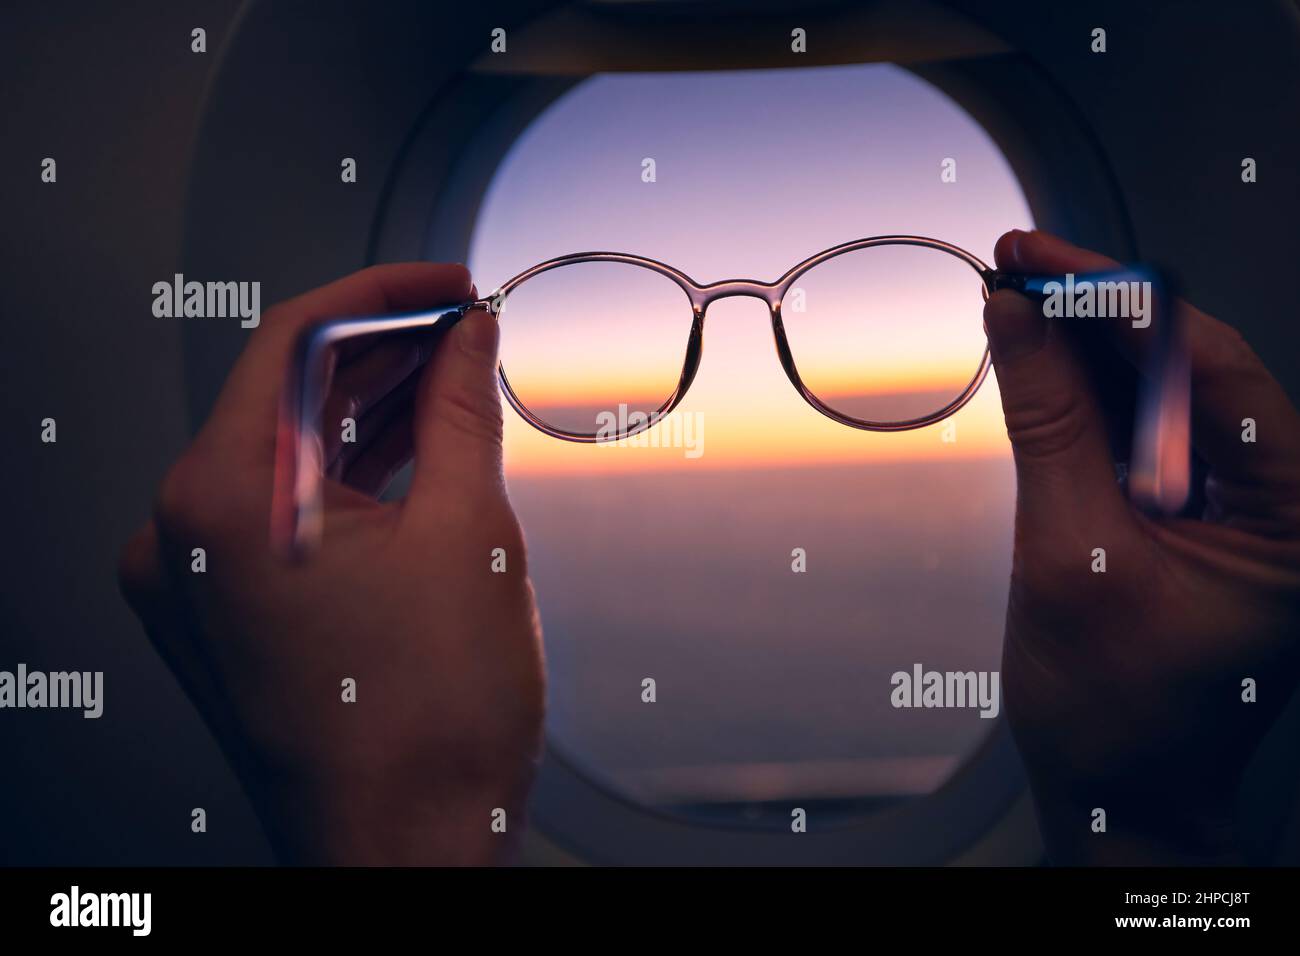 Hand of passenger holding eyeglasses against airplane window during colorful sunset. Themes travel, eyesight and vision. Stock Photo